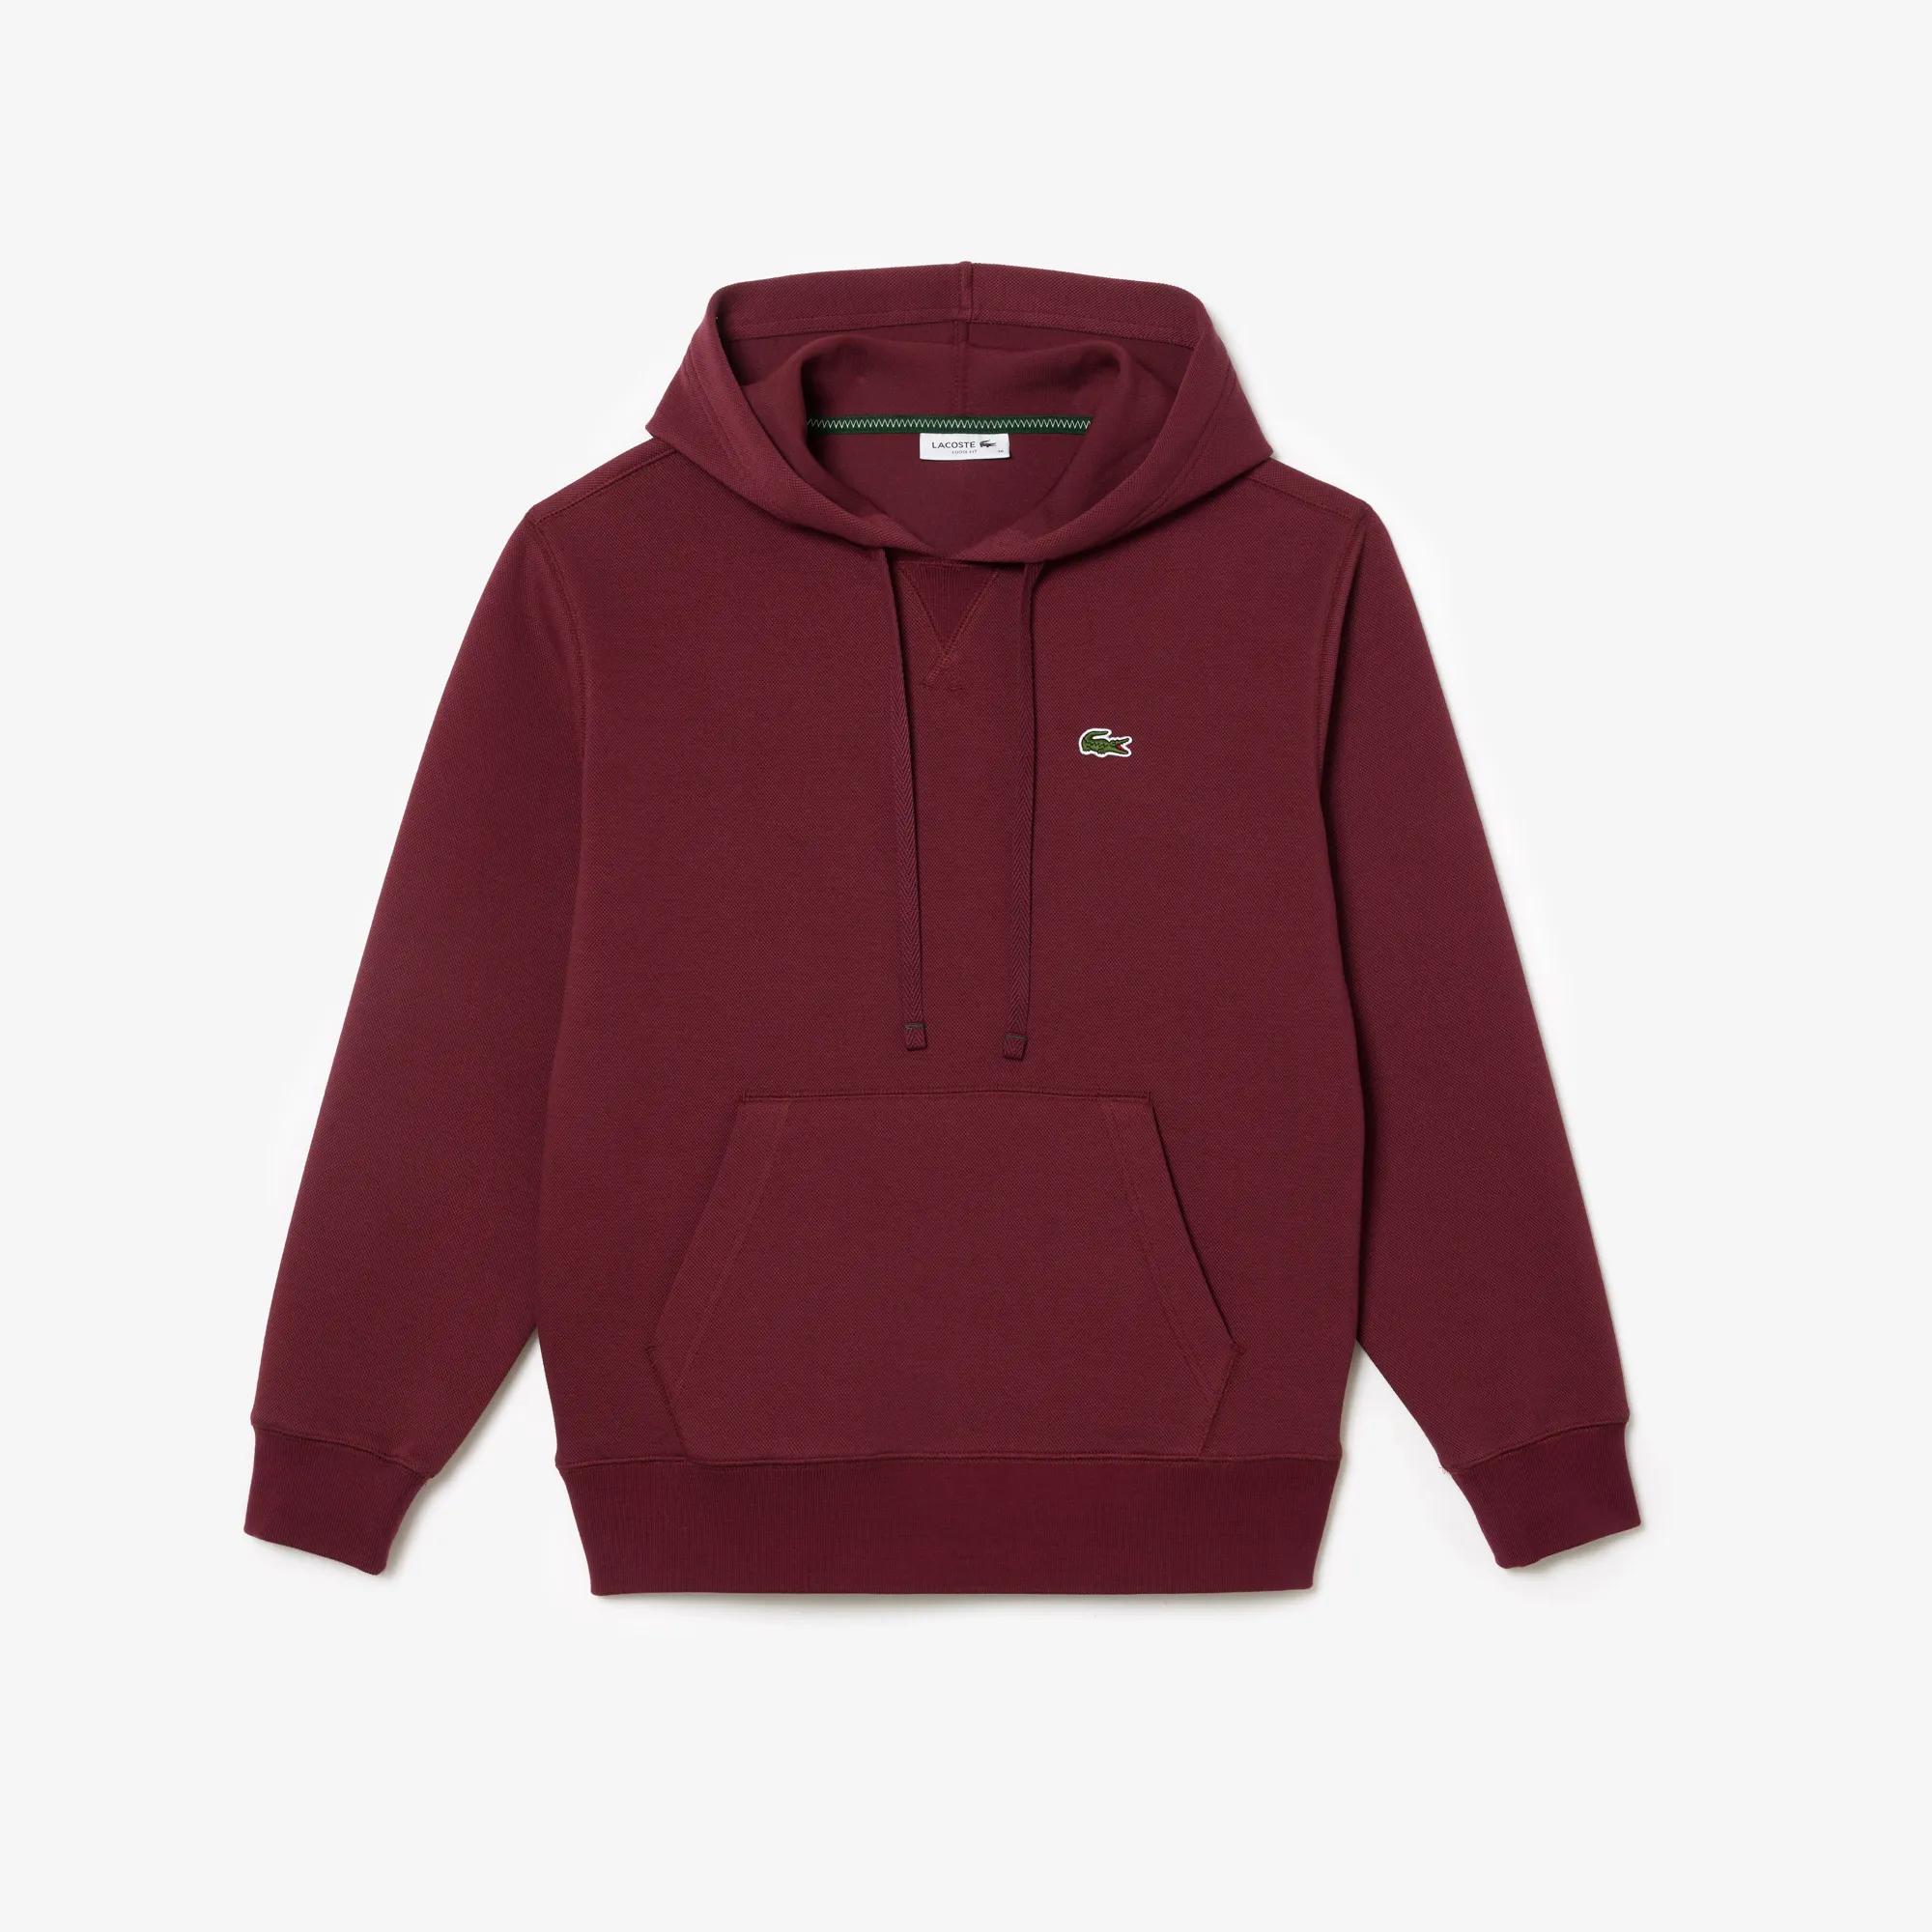 Women’s Loose Fit Cotton Blend Hoodie